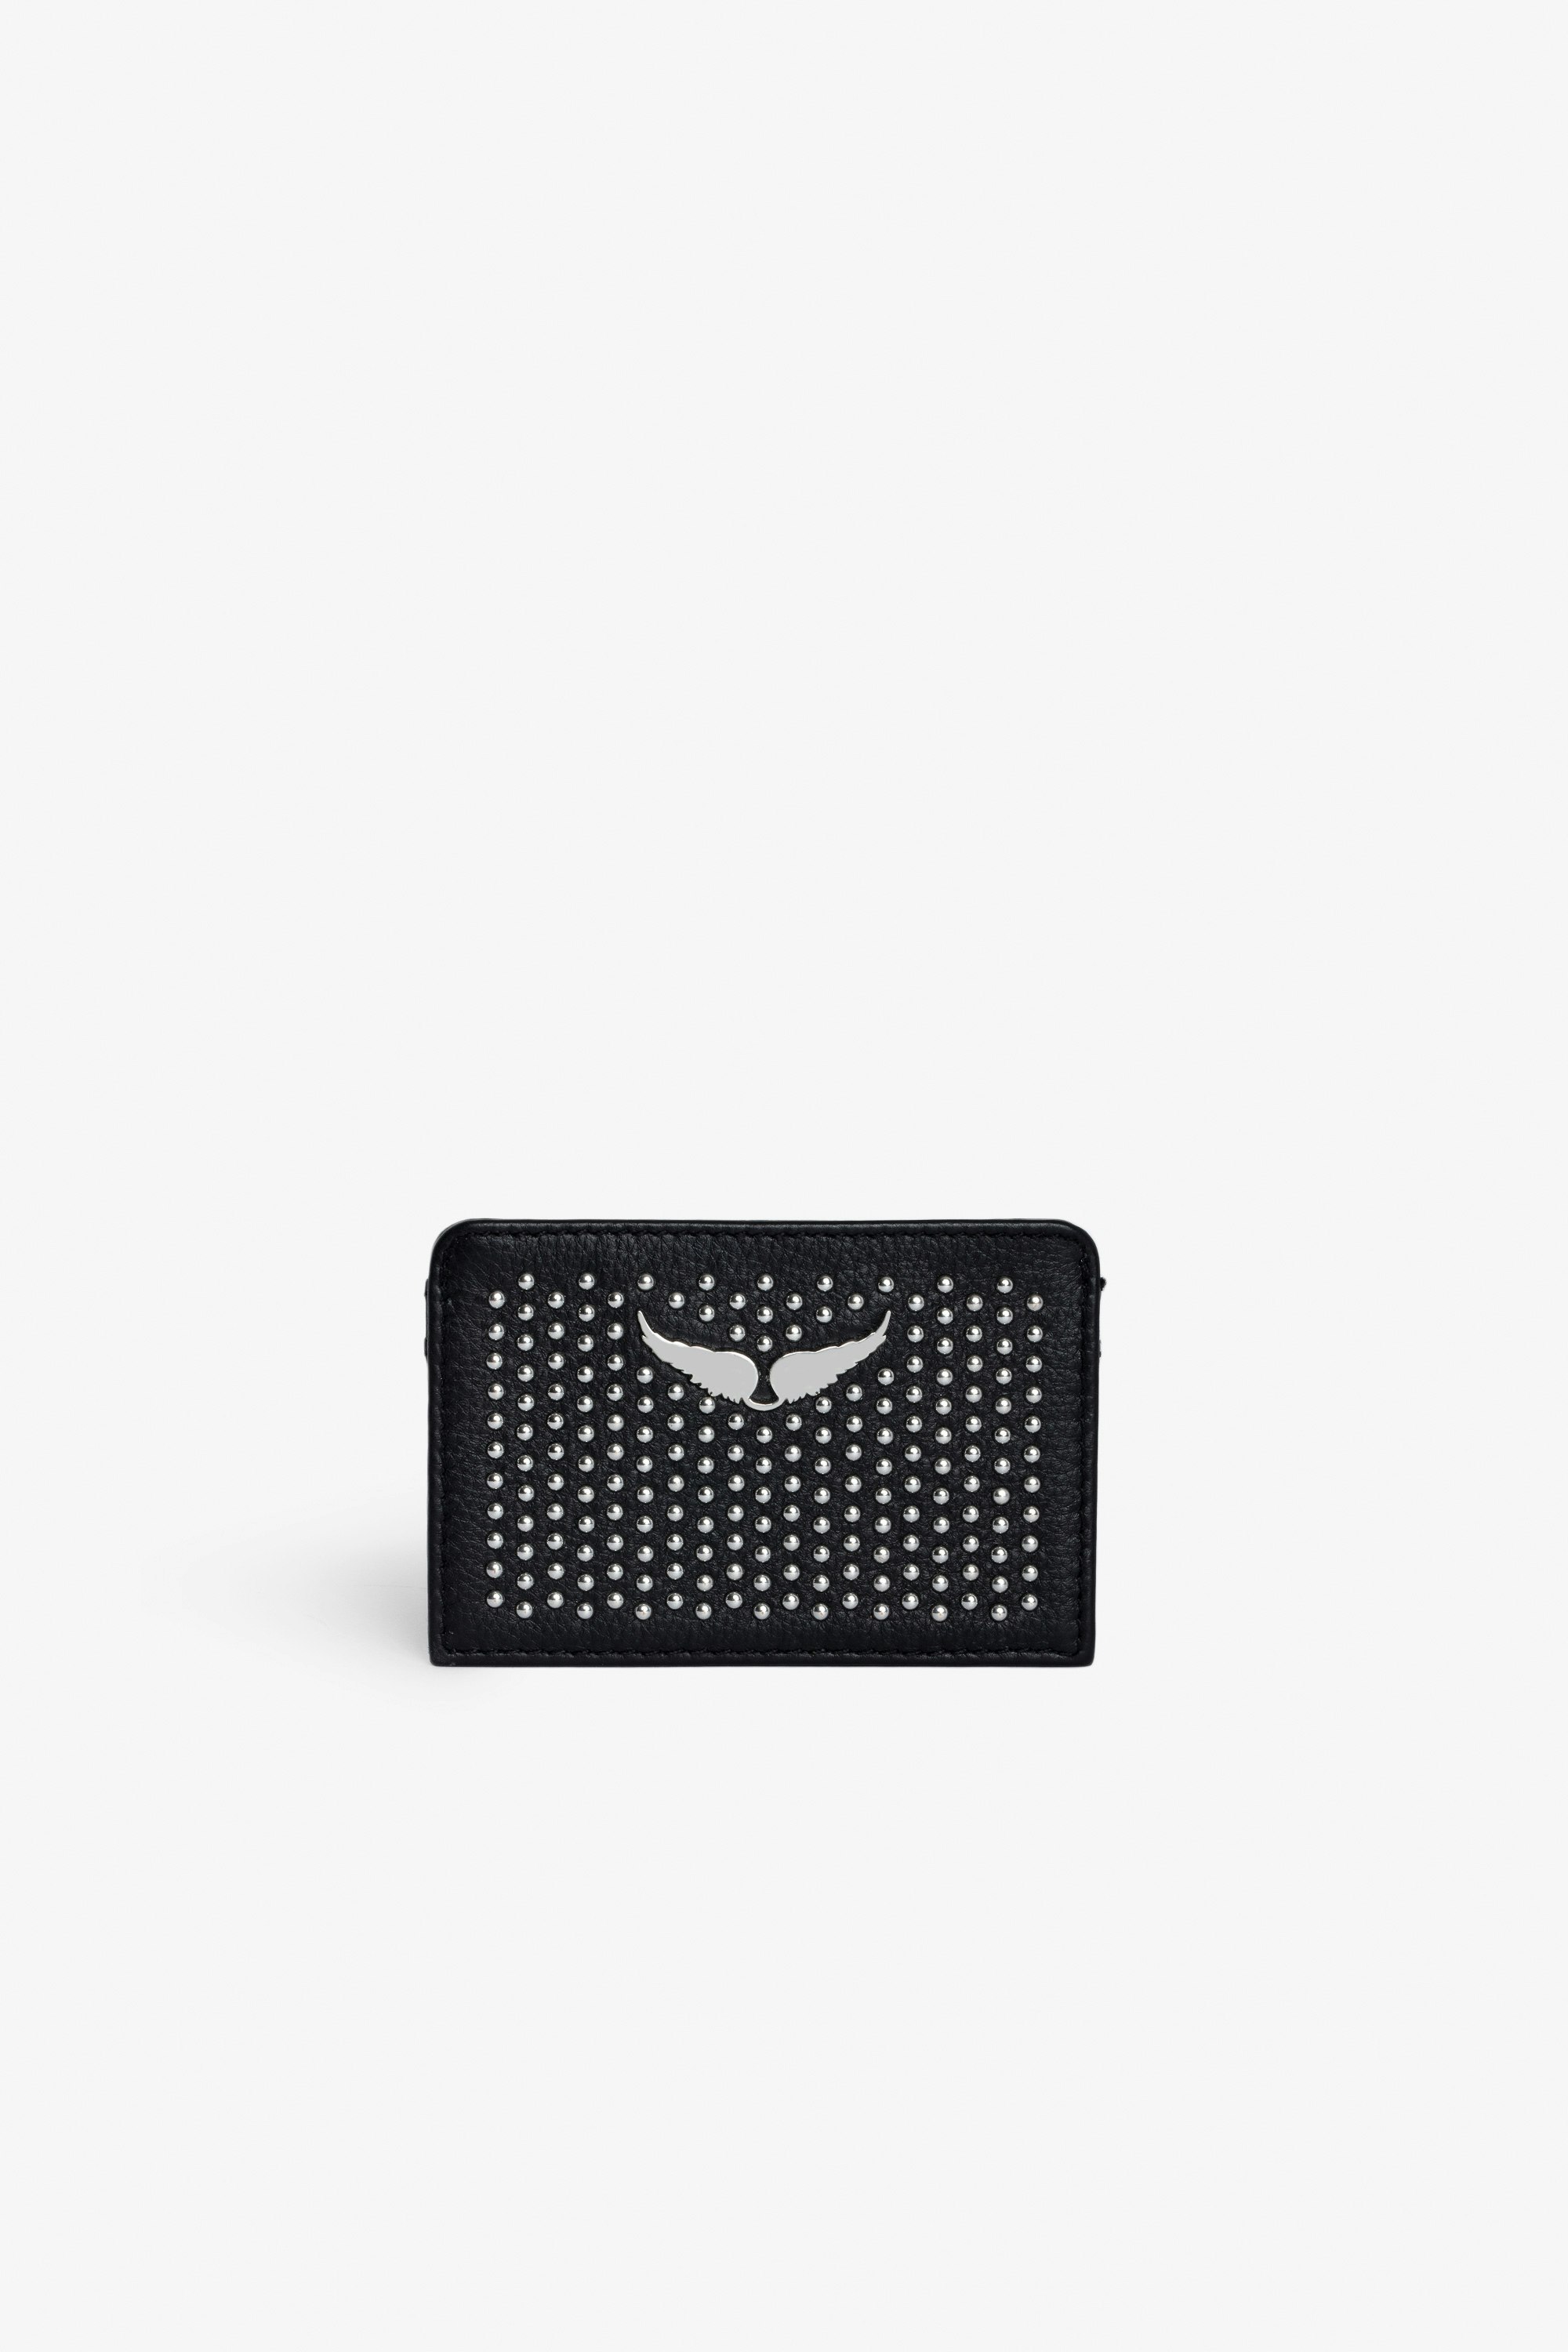 ZV Pass Dotted Swiss Card Holder Women’s black grained leather card holder with studs and wings charm.